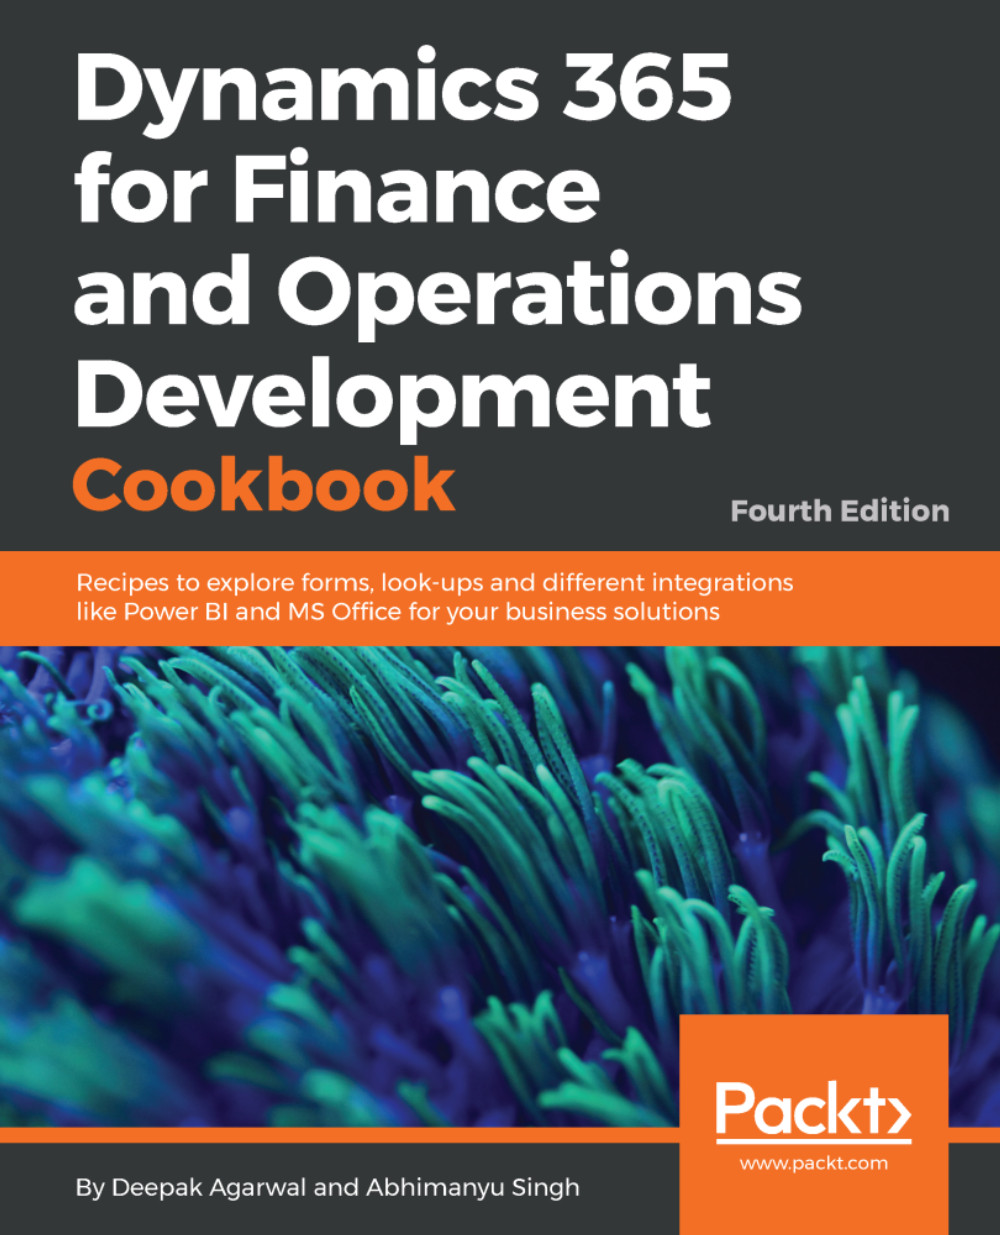 Dynamics 365 for Finance and Operations Development Cookbook